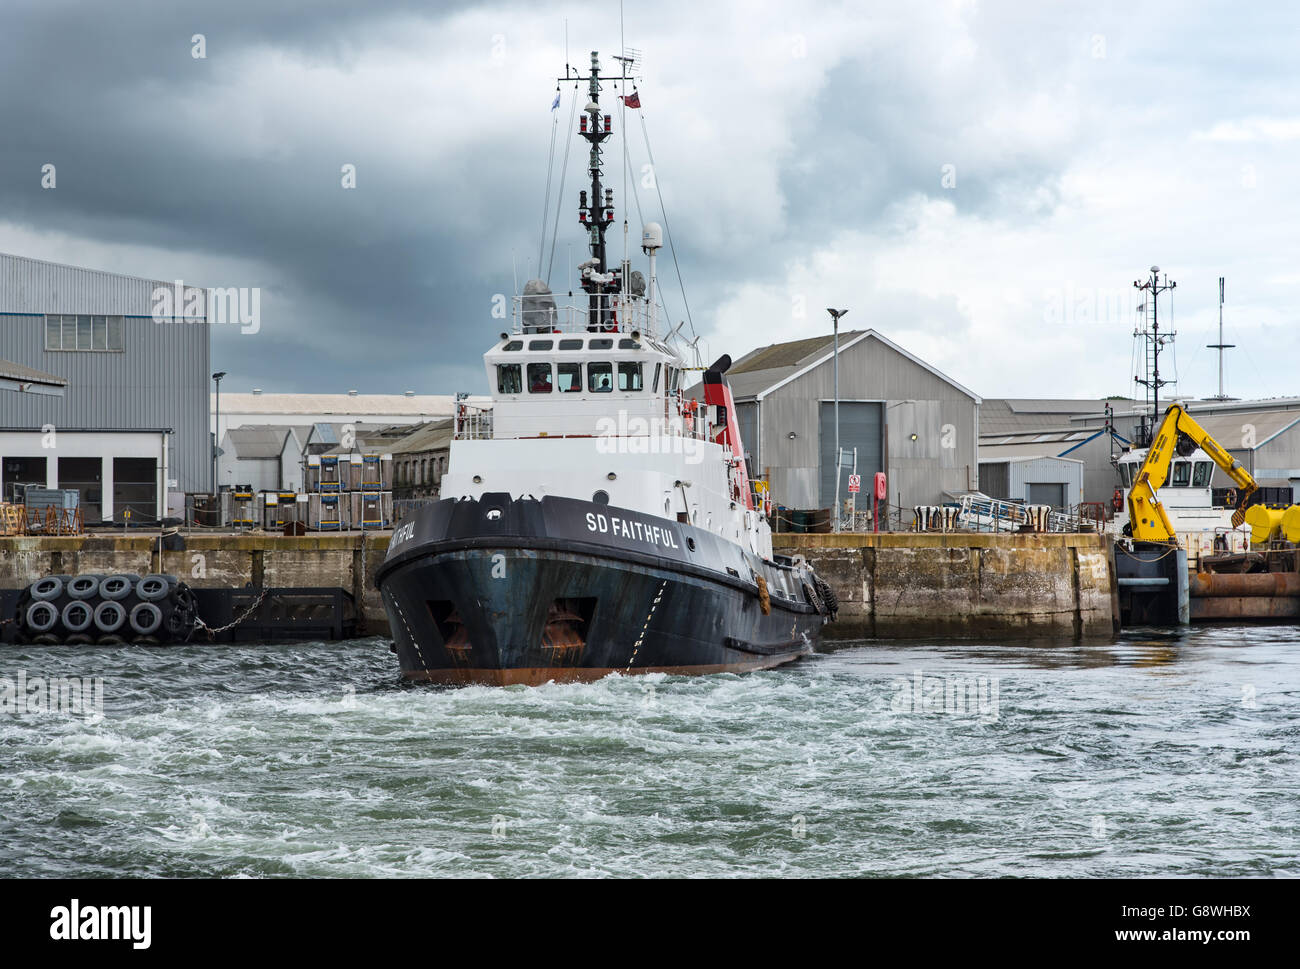 SD Faithful is a twin tractor unit tug operated by Serco Marine Services in support of Royal Naval activity around Devonport Stock Photo